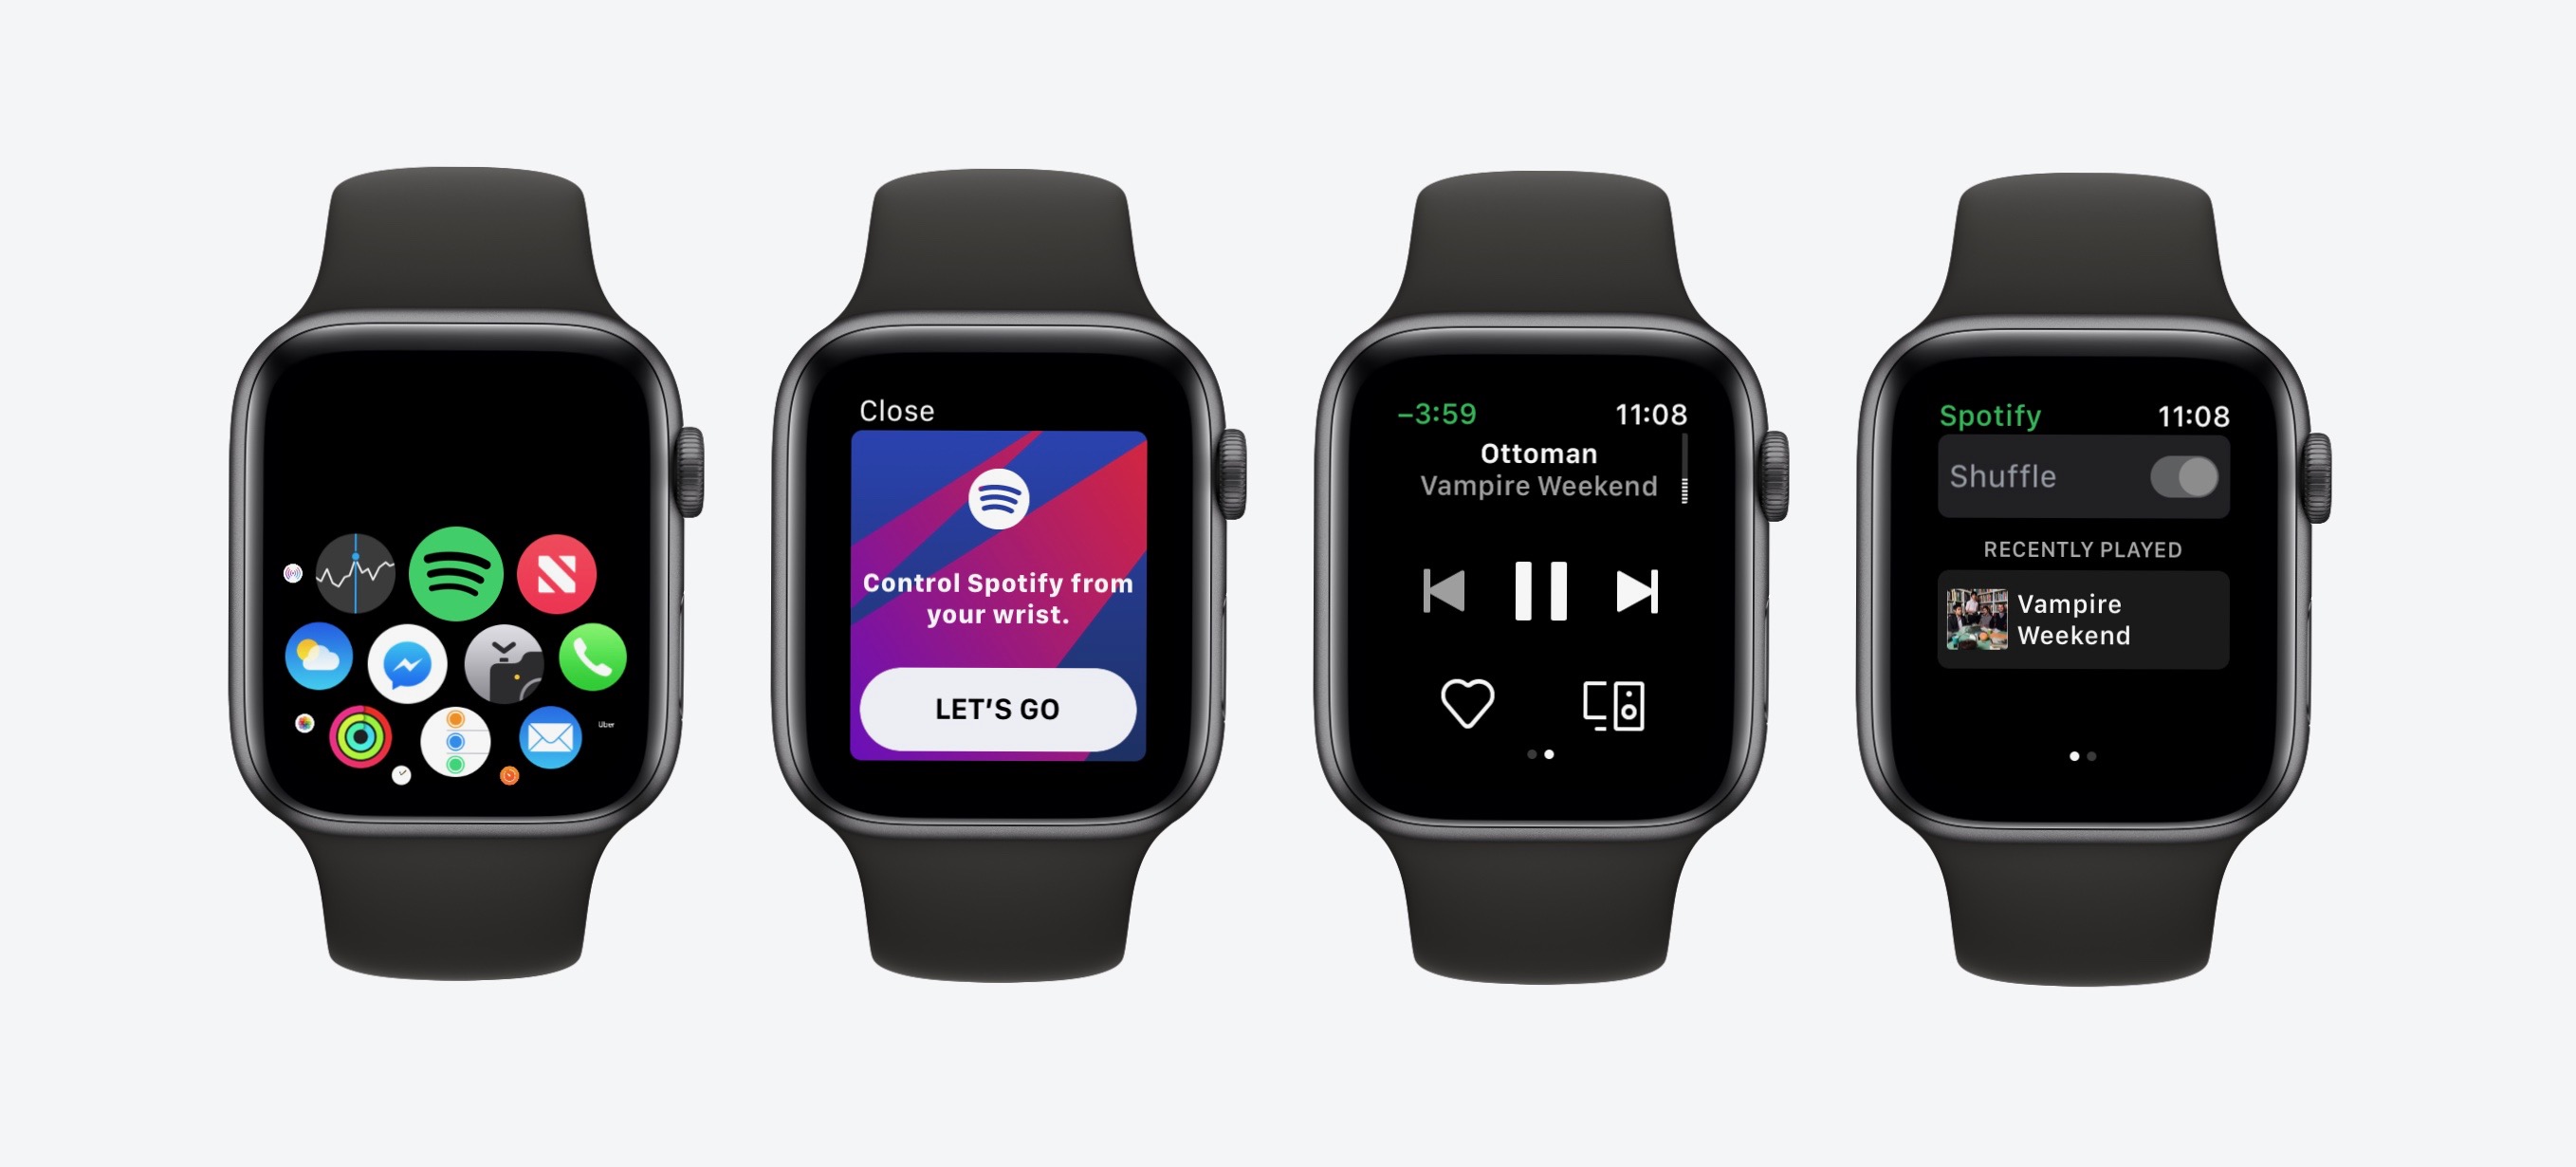 How to Download Spotify on Your Apple Watch? 15